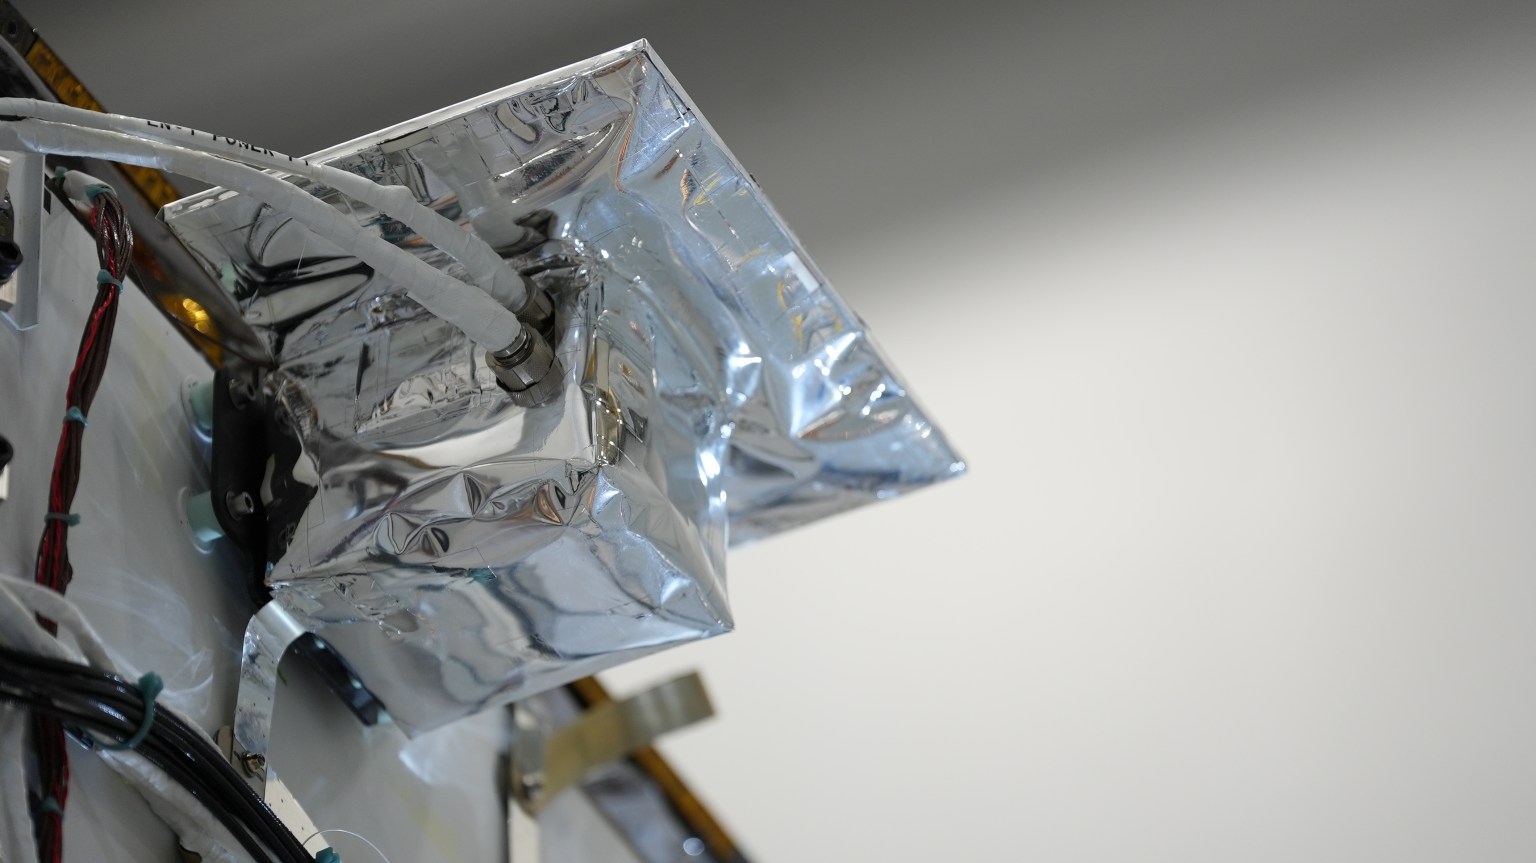 An close up image of the Lunar Node-1 payload covered in a silver wrapping to protect it in space.